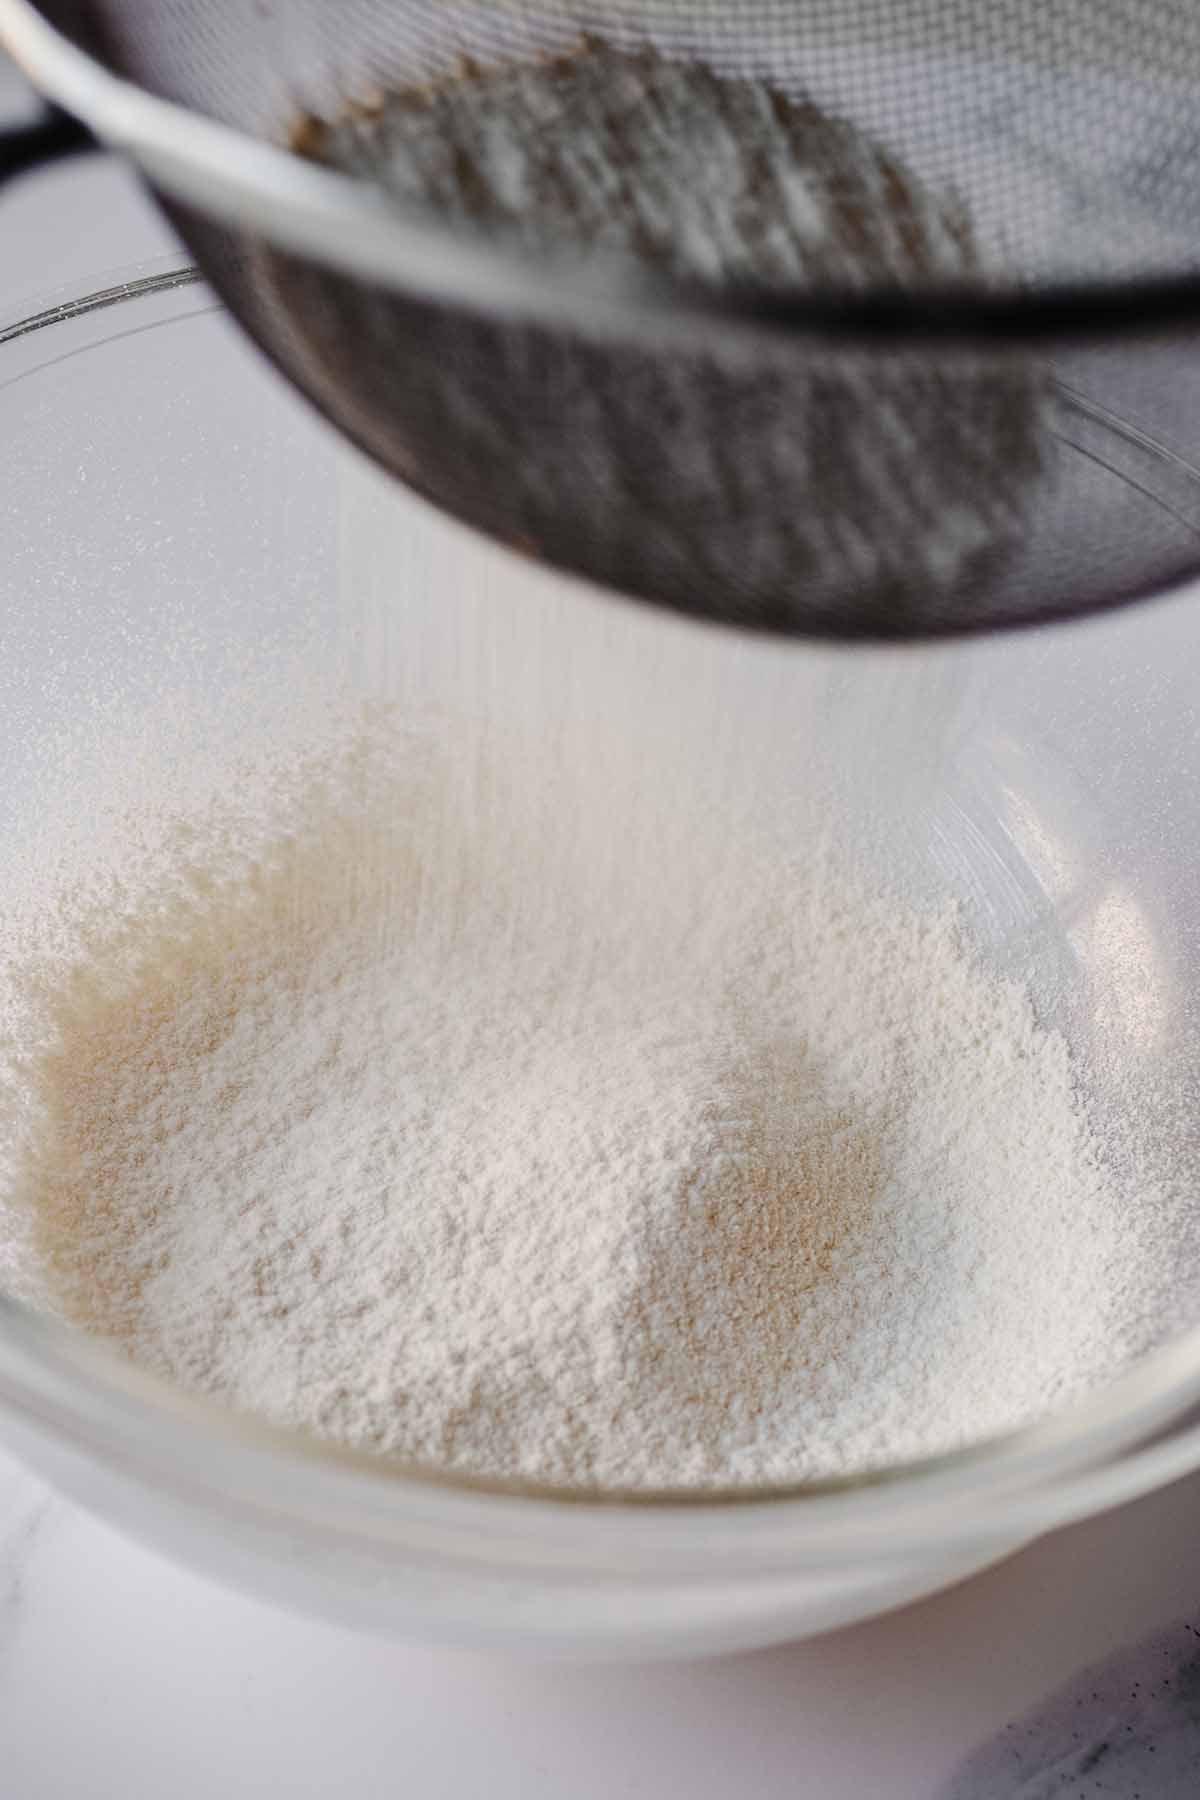 Flour being sifted into a glass bowl